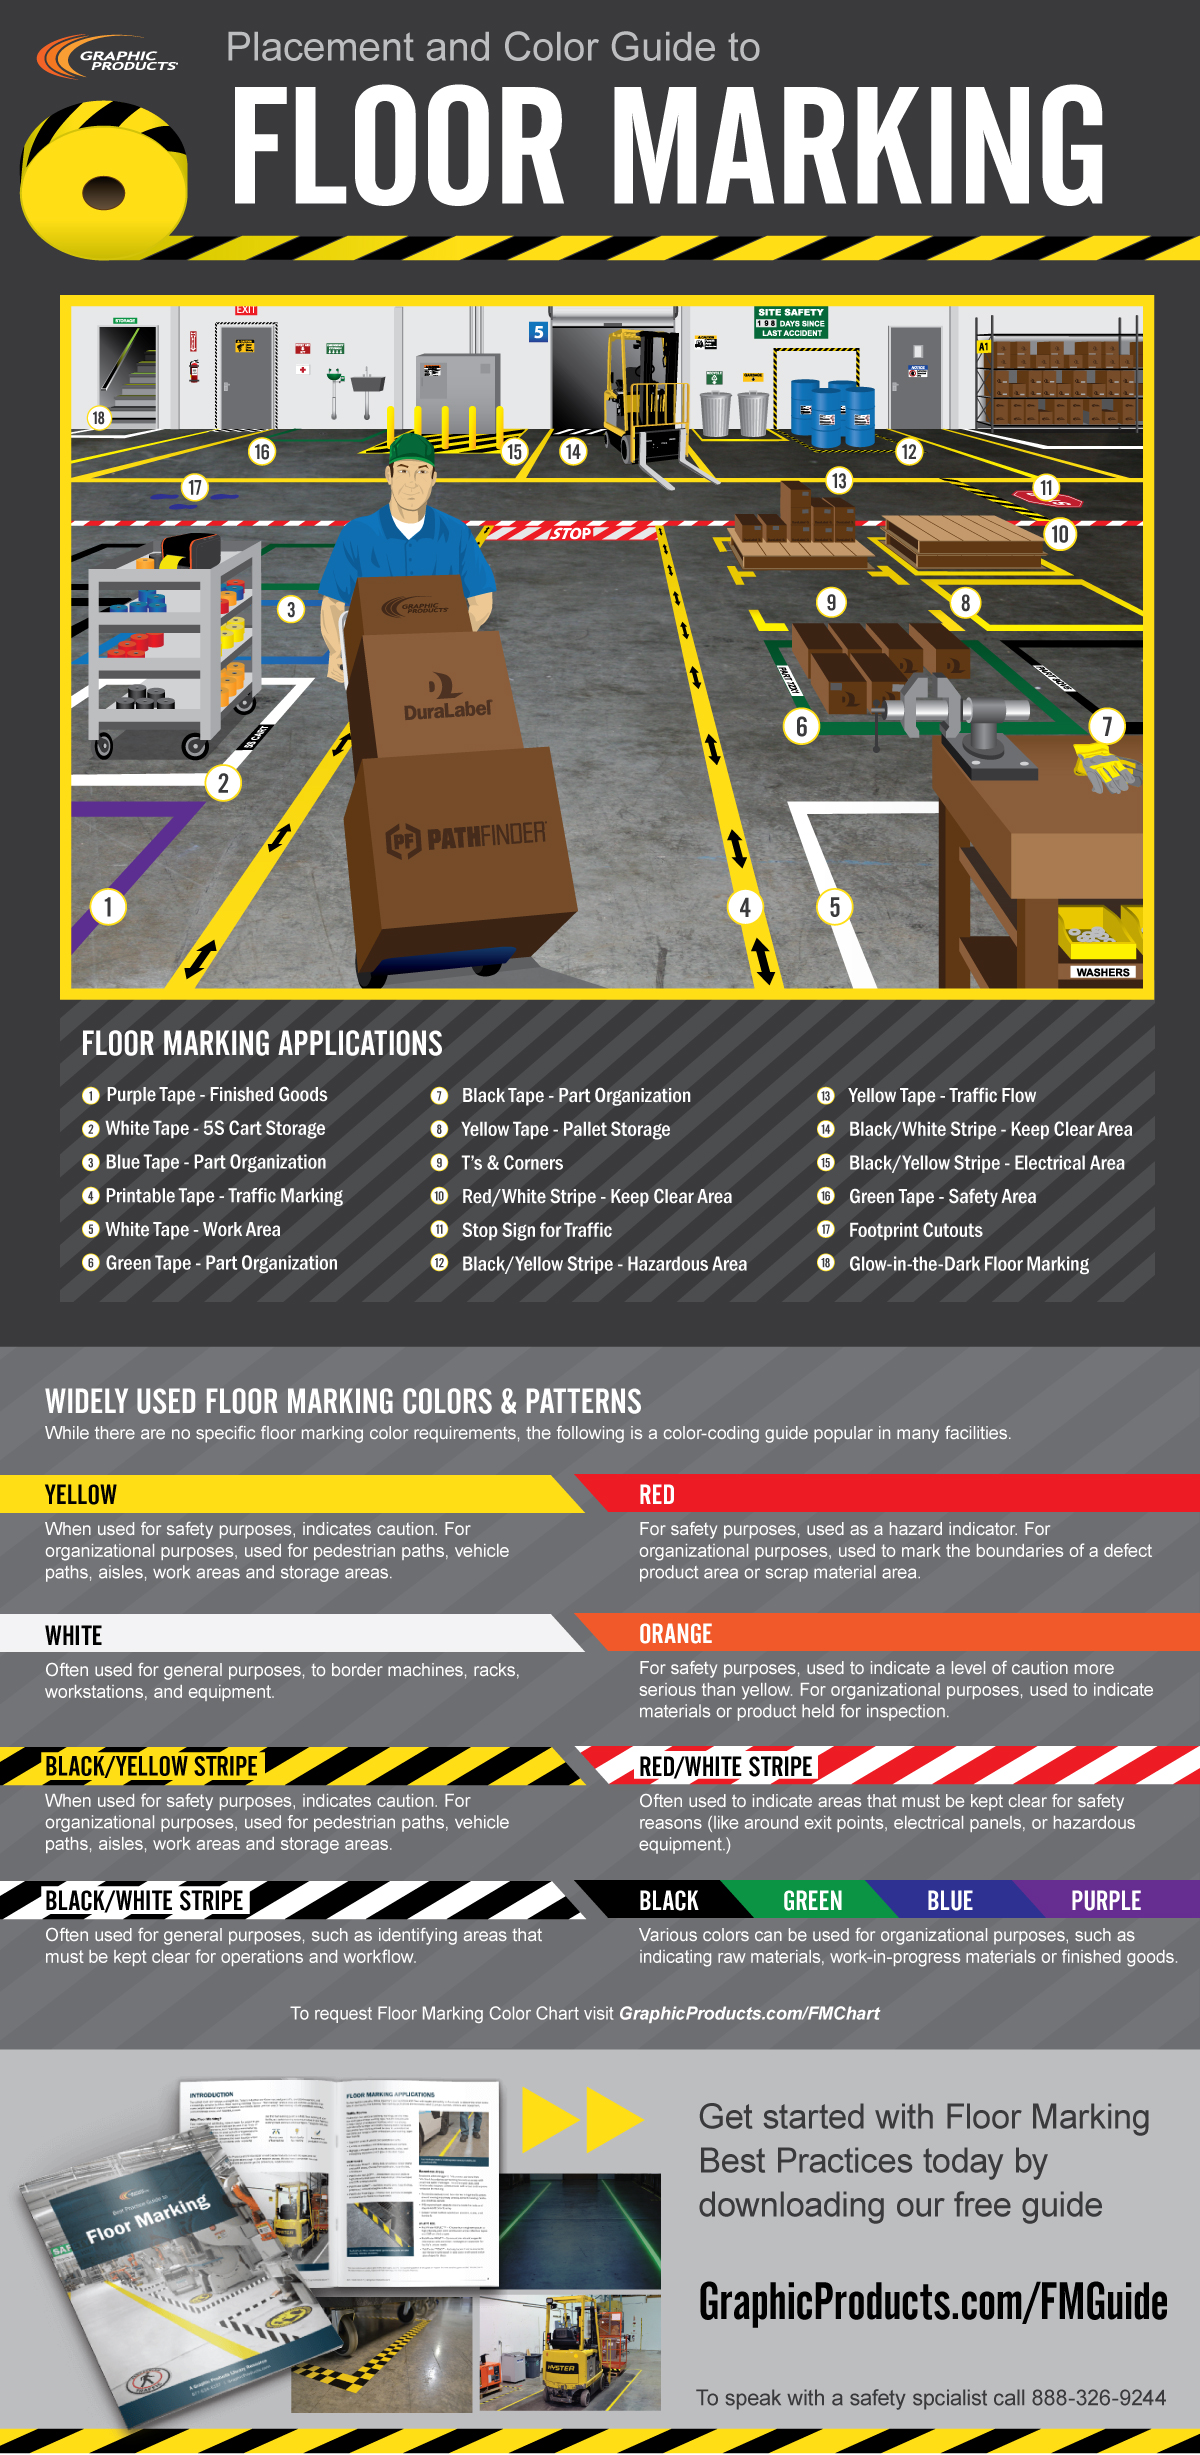 An infographic covering different types of floor marking applications and floor marking tapes.